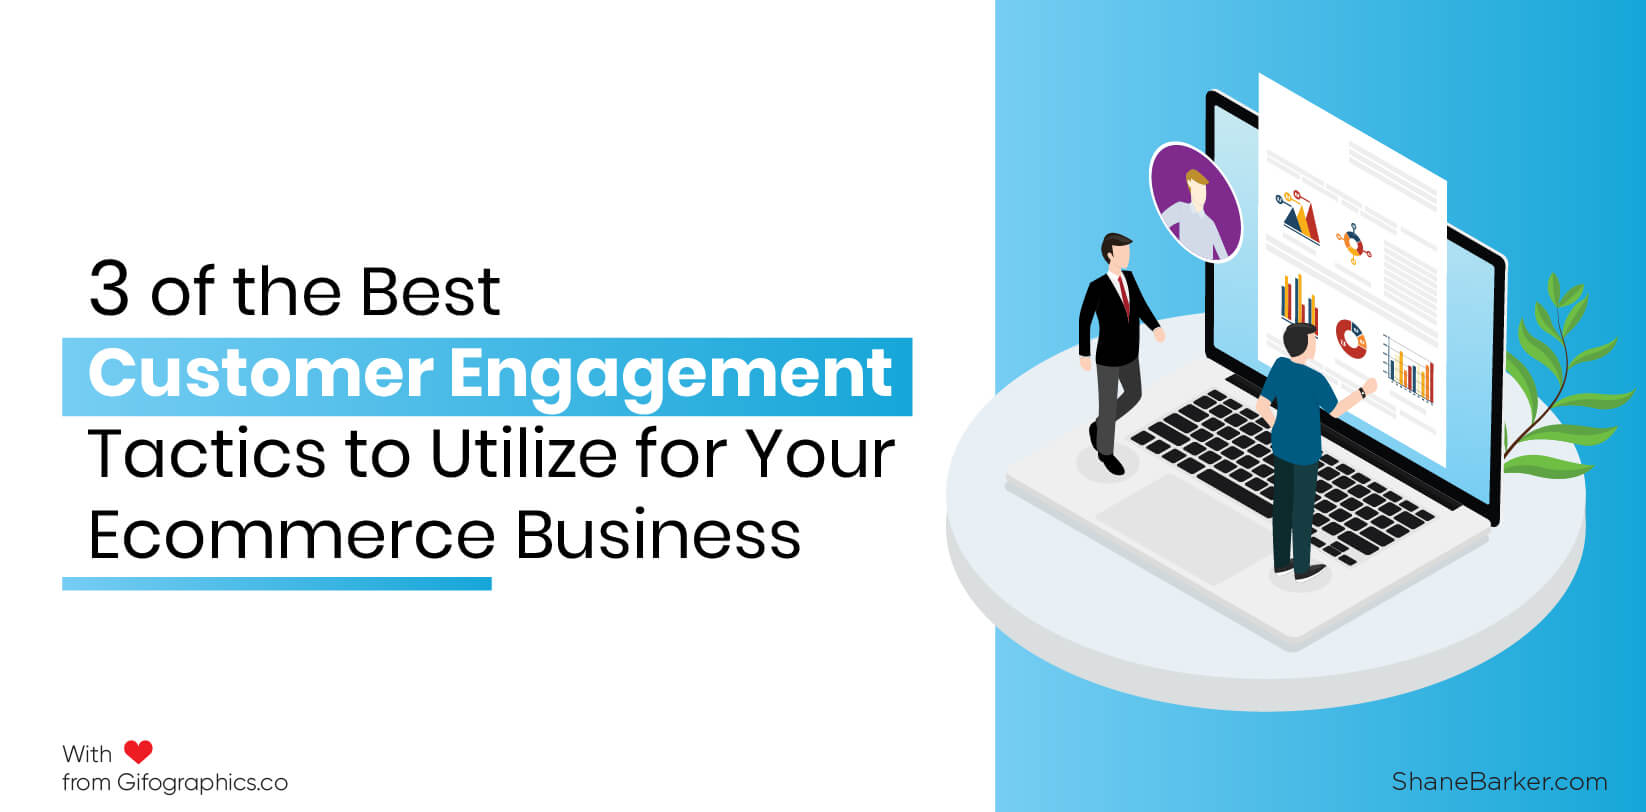 3 of the Best Customer Engagement Tactics to Utilize in Your Ecommerce Business